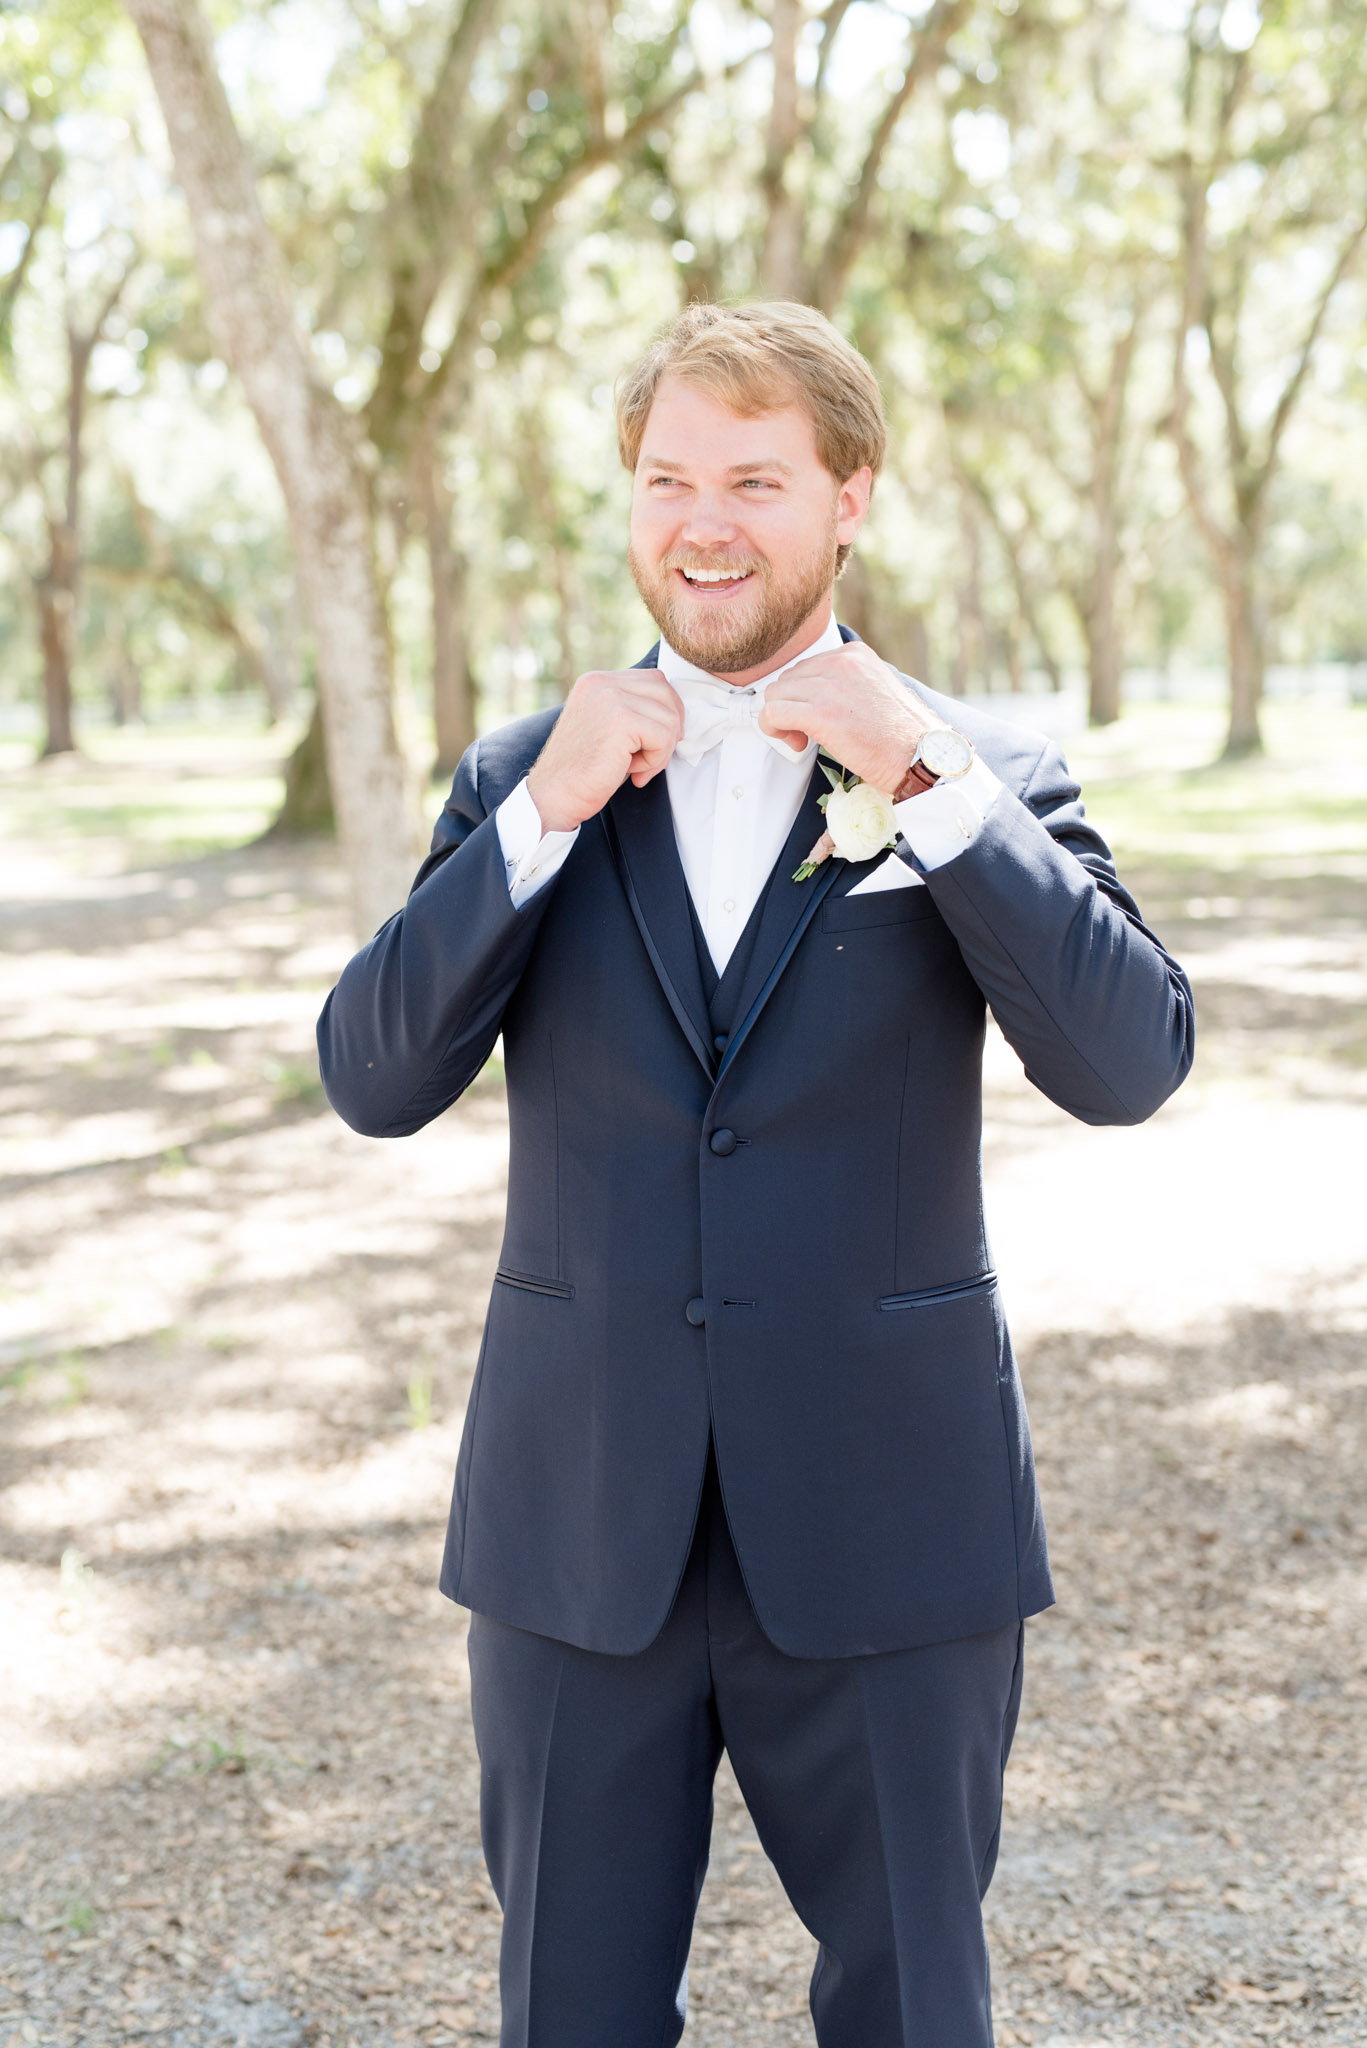 Groom smiles and straightens bow tie.